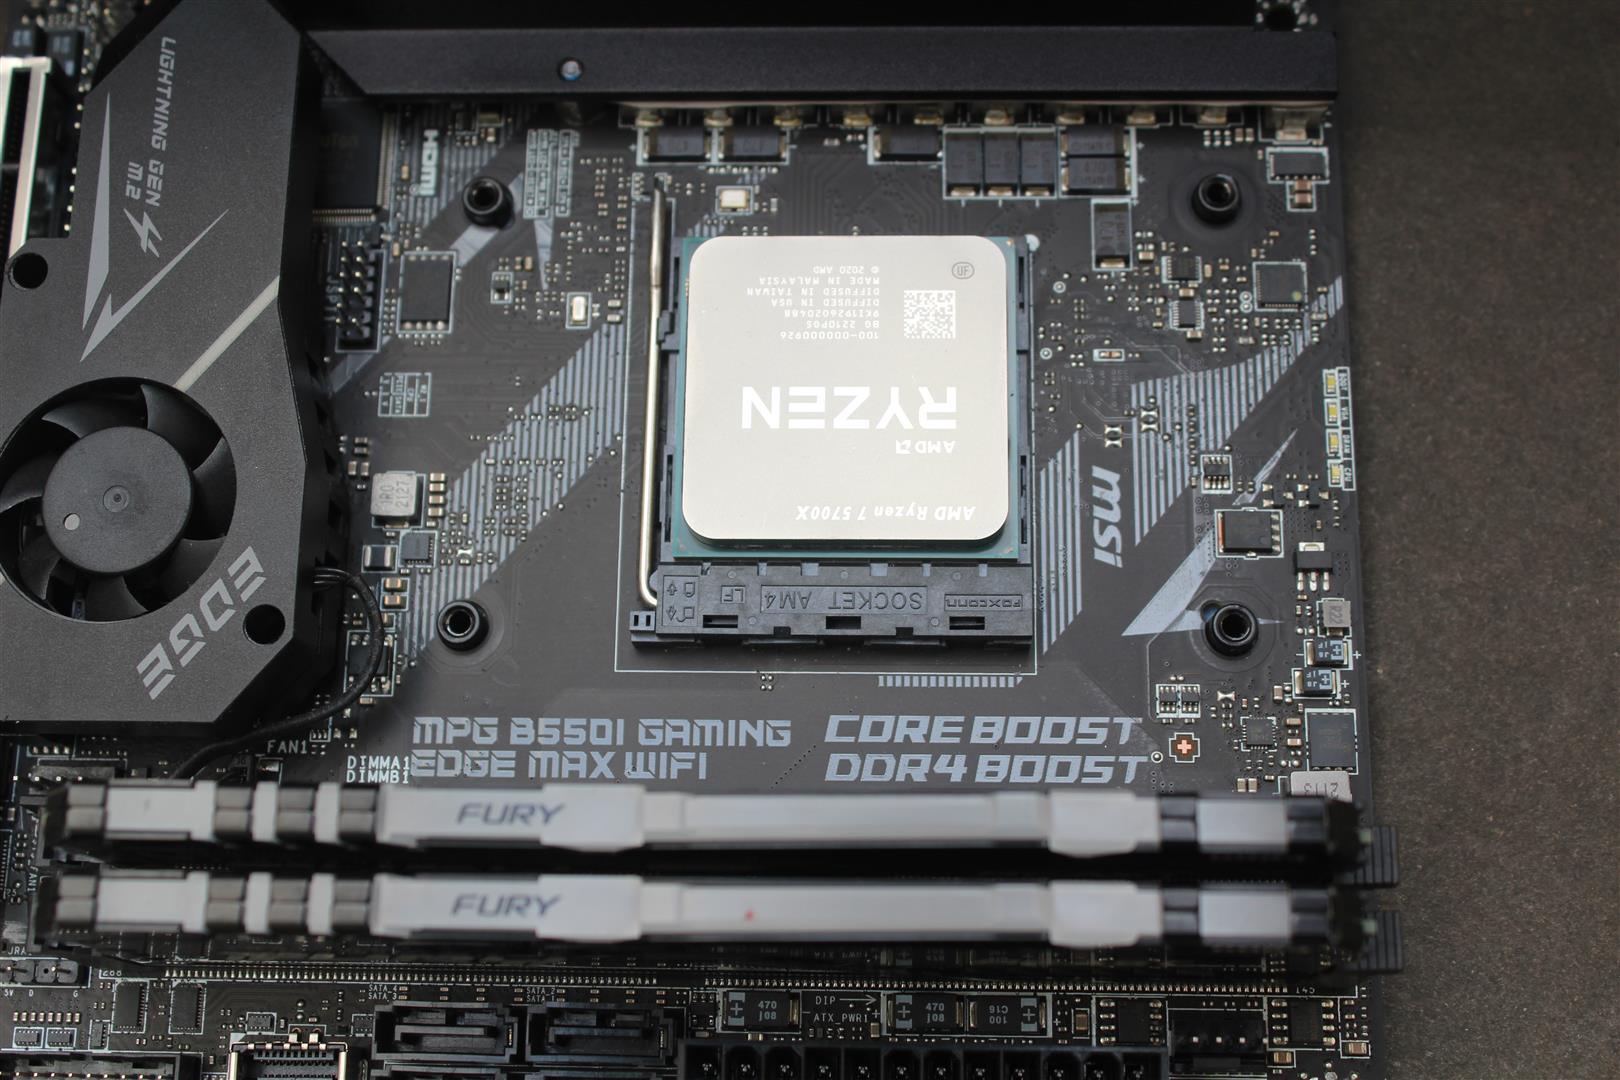 AMD Ryzen 7 5700X Gaming Benchmarks - AMD Ryzen 7 5700X Review: A Price Cut  Disguised as a New Chip - Page 3